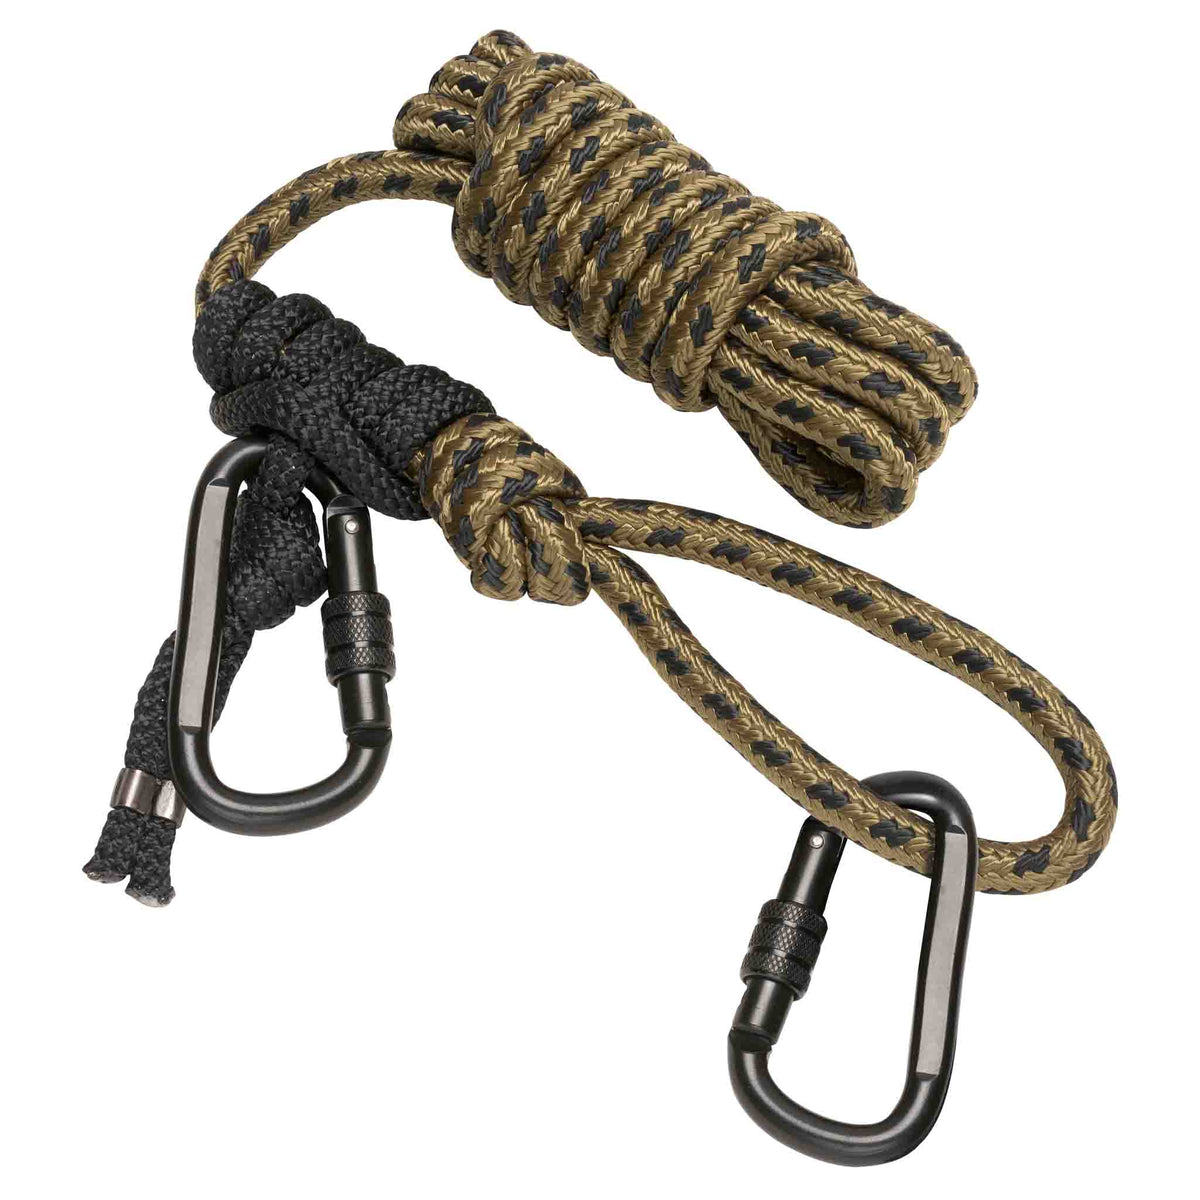 Wholesale safety rope with hook for the Safety of Climbers and